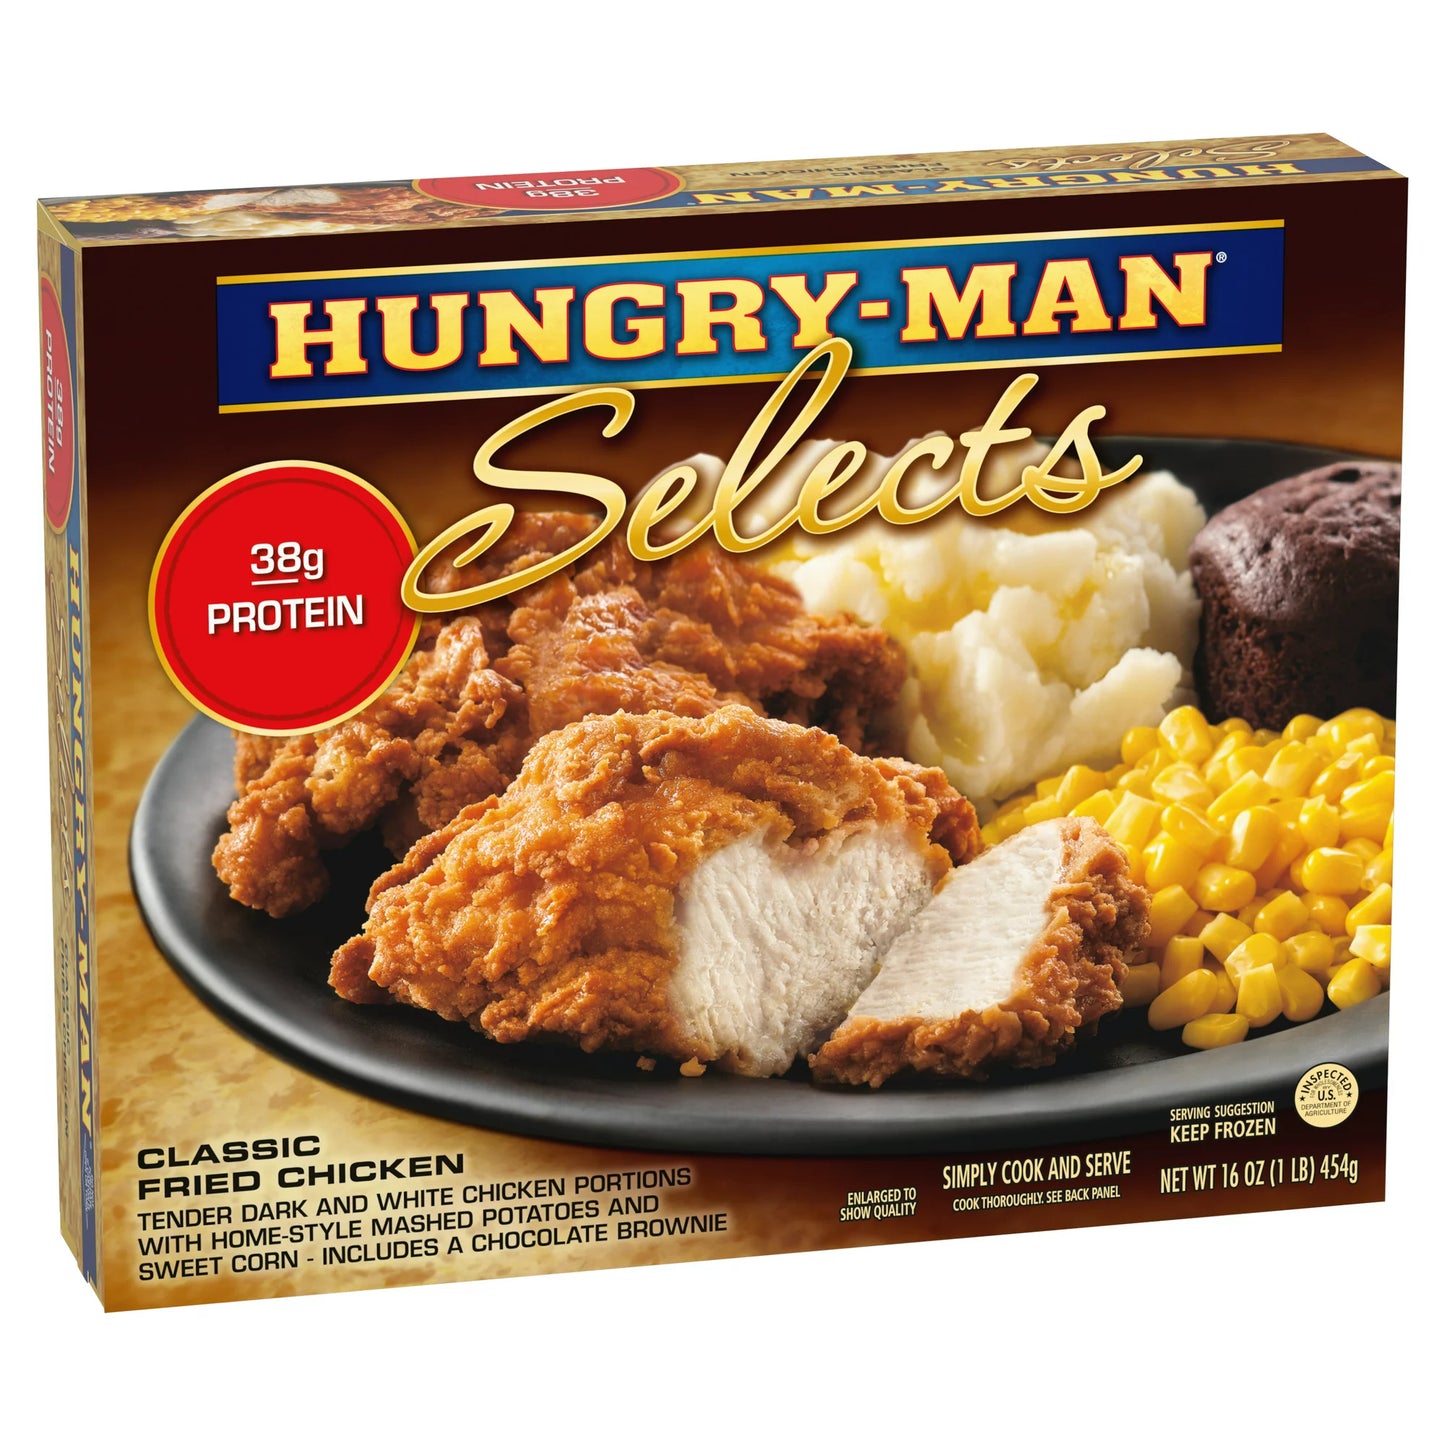 Hungry Man Selects Classic Fried Chicken Frozen Meal, 16 oz, -- 8 count